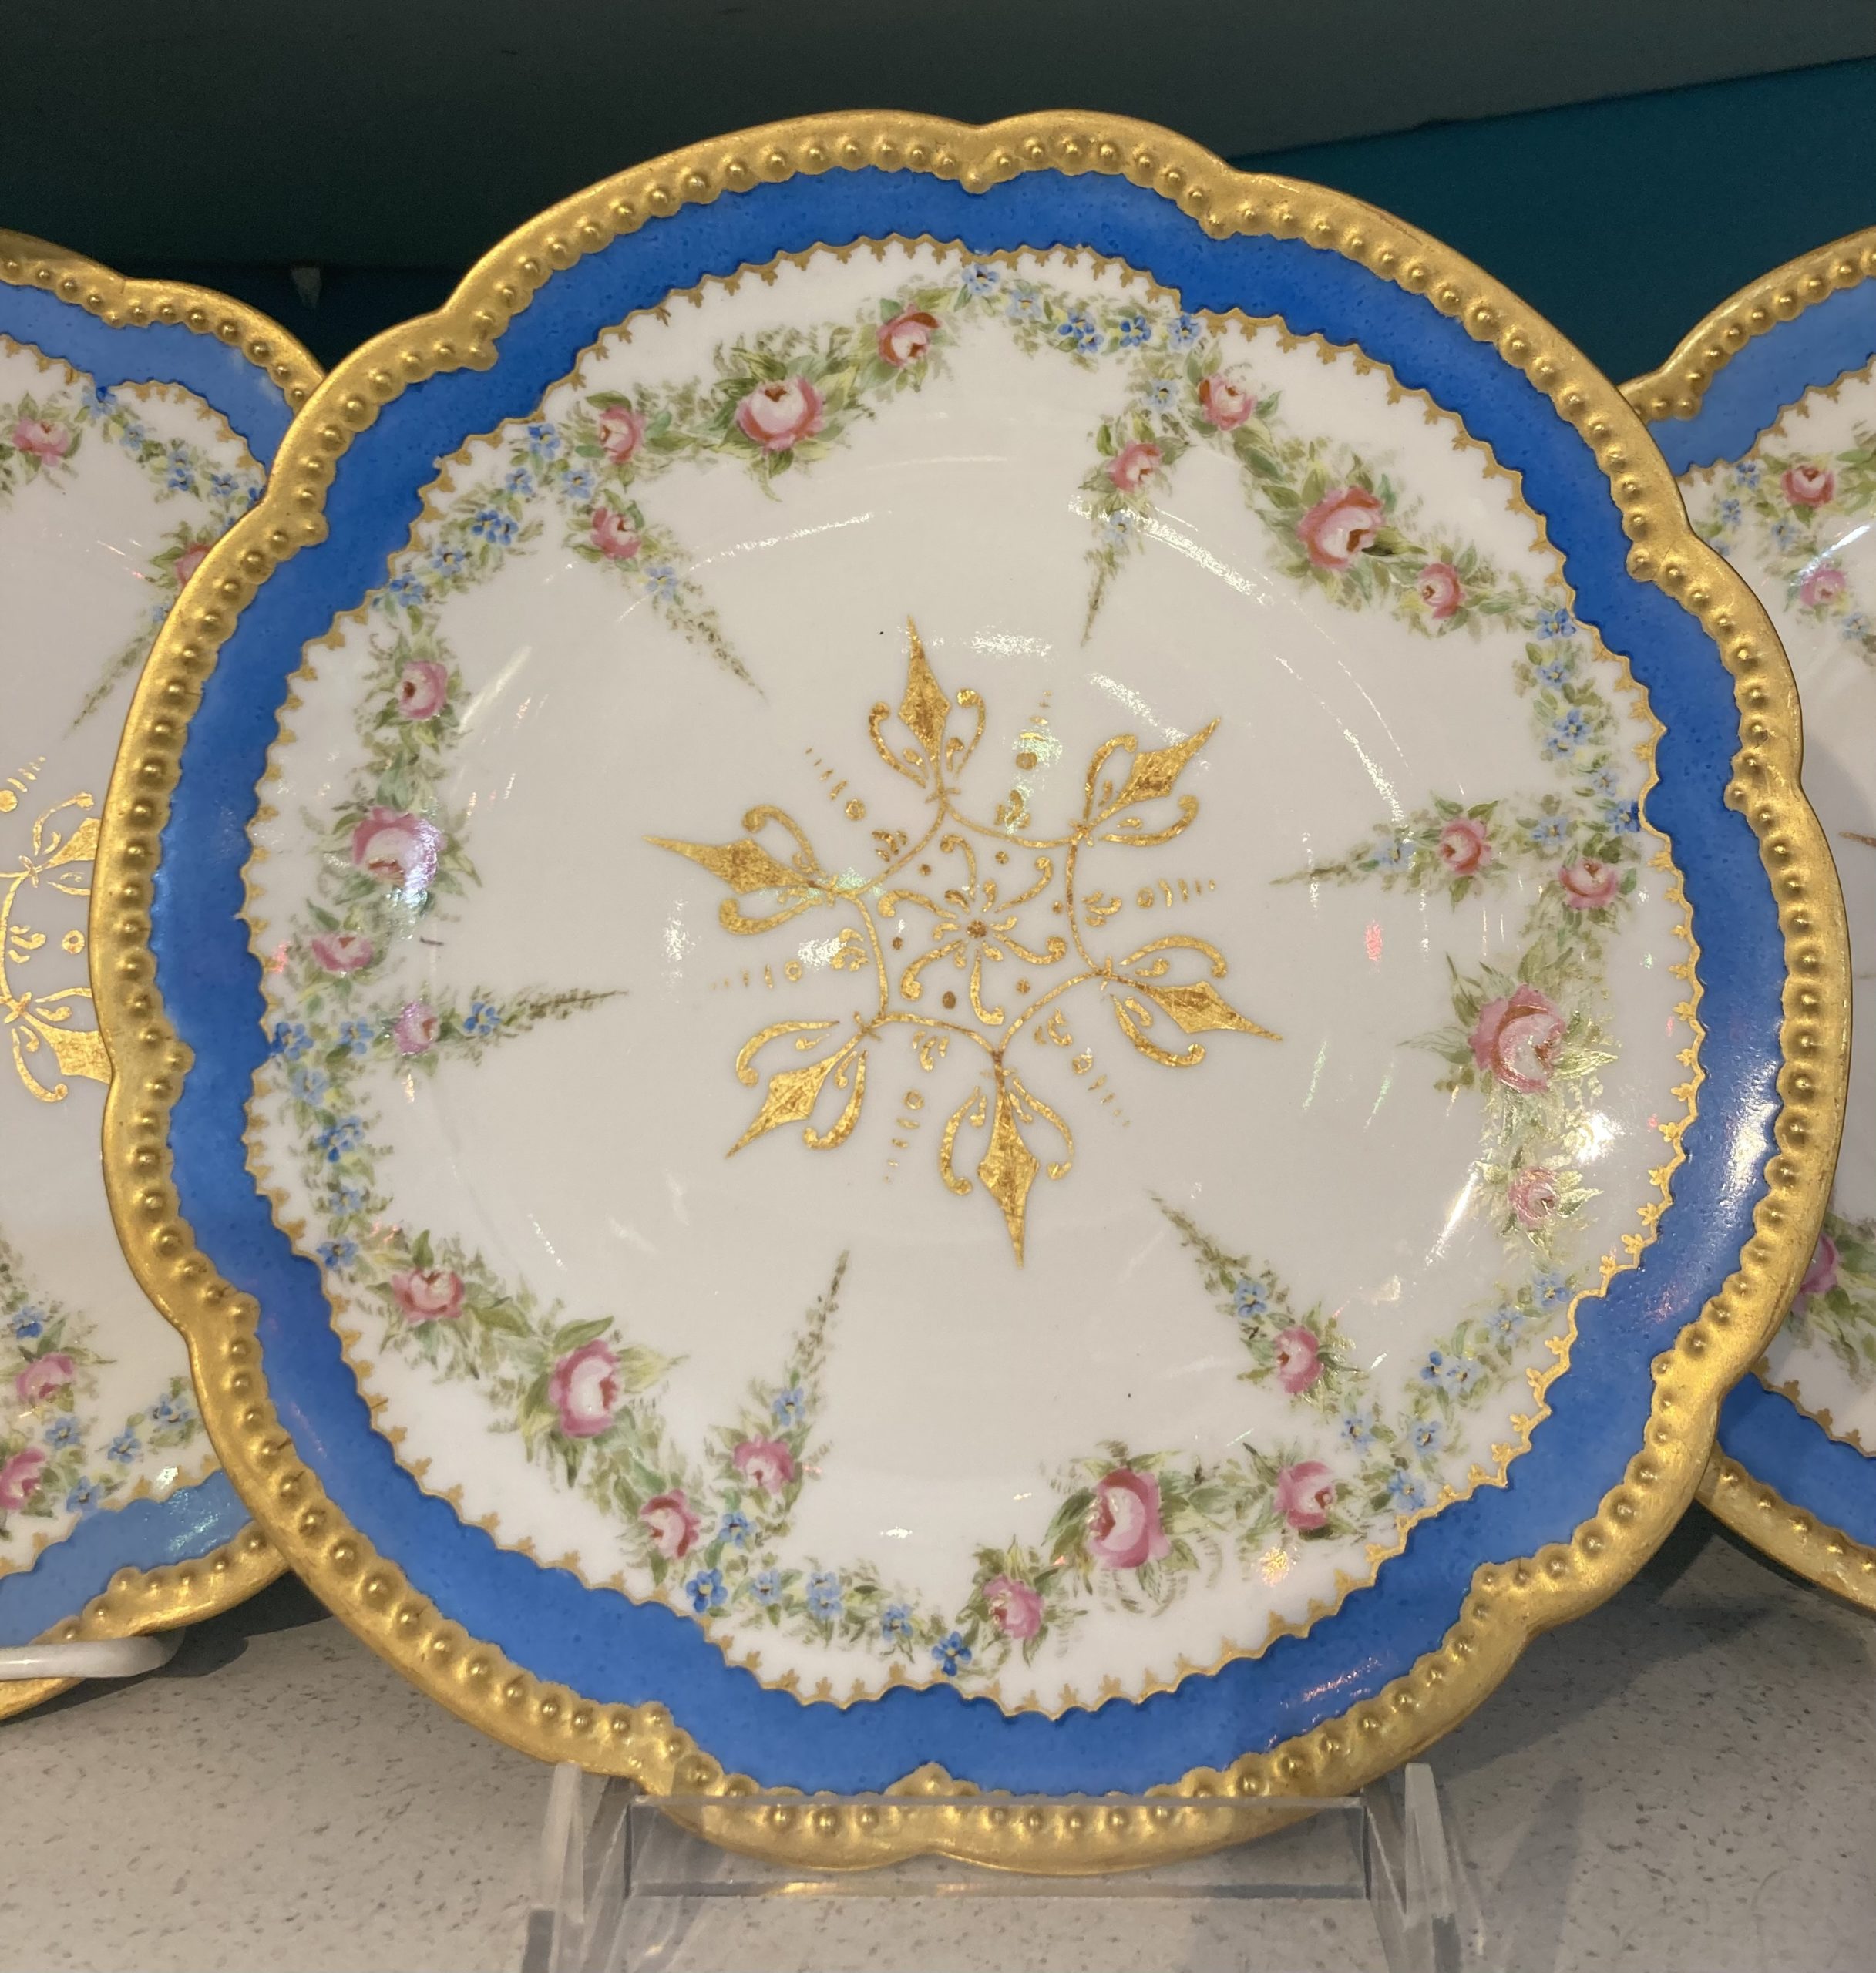 Hand-painted Antique French Dessert Plates